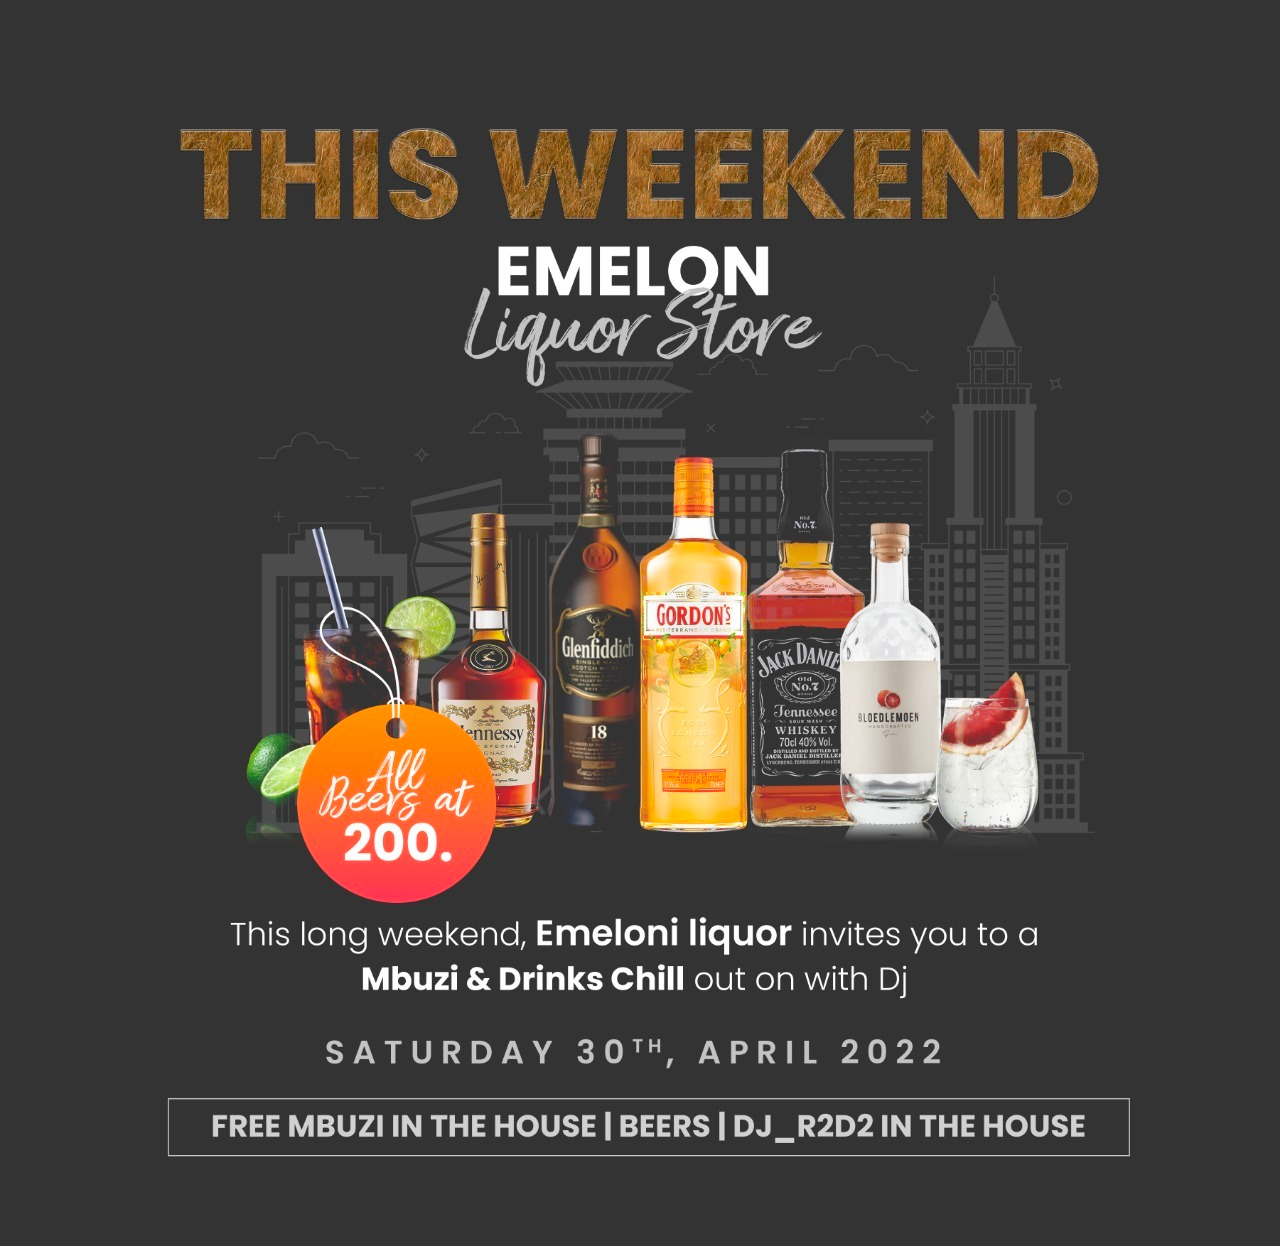 a pd
Ln Ch

nied
} (A

 

Novy

  

This long weekend, Emeloni liquor invites you to a
Mbuzi &amp; Drinks Chill out on with Dj

SATURDAY 30", APRIL 2022

FREE MBUZI IN THE HOUSE | BEERS | DJ_R2D2 IN THE HOUSE